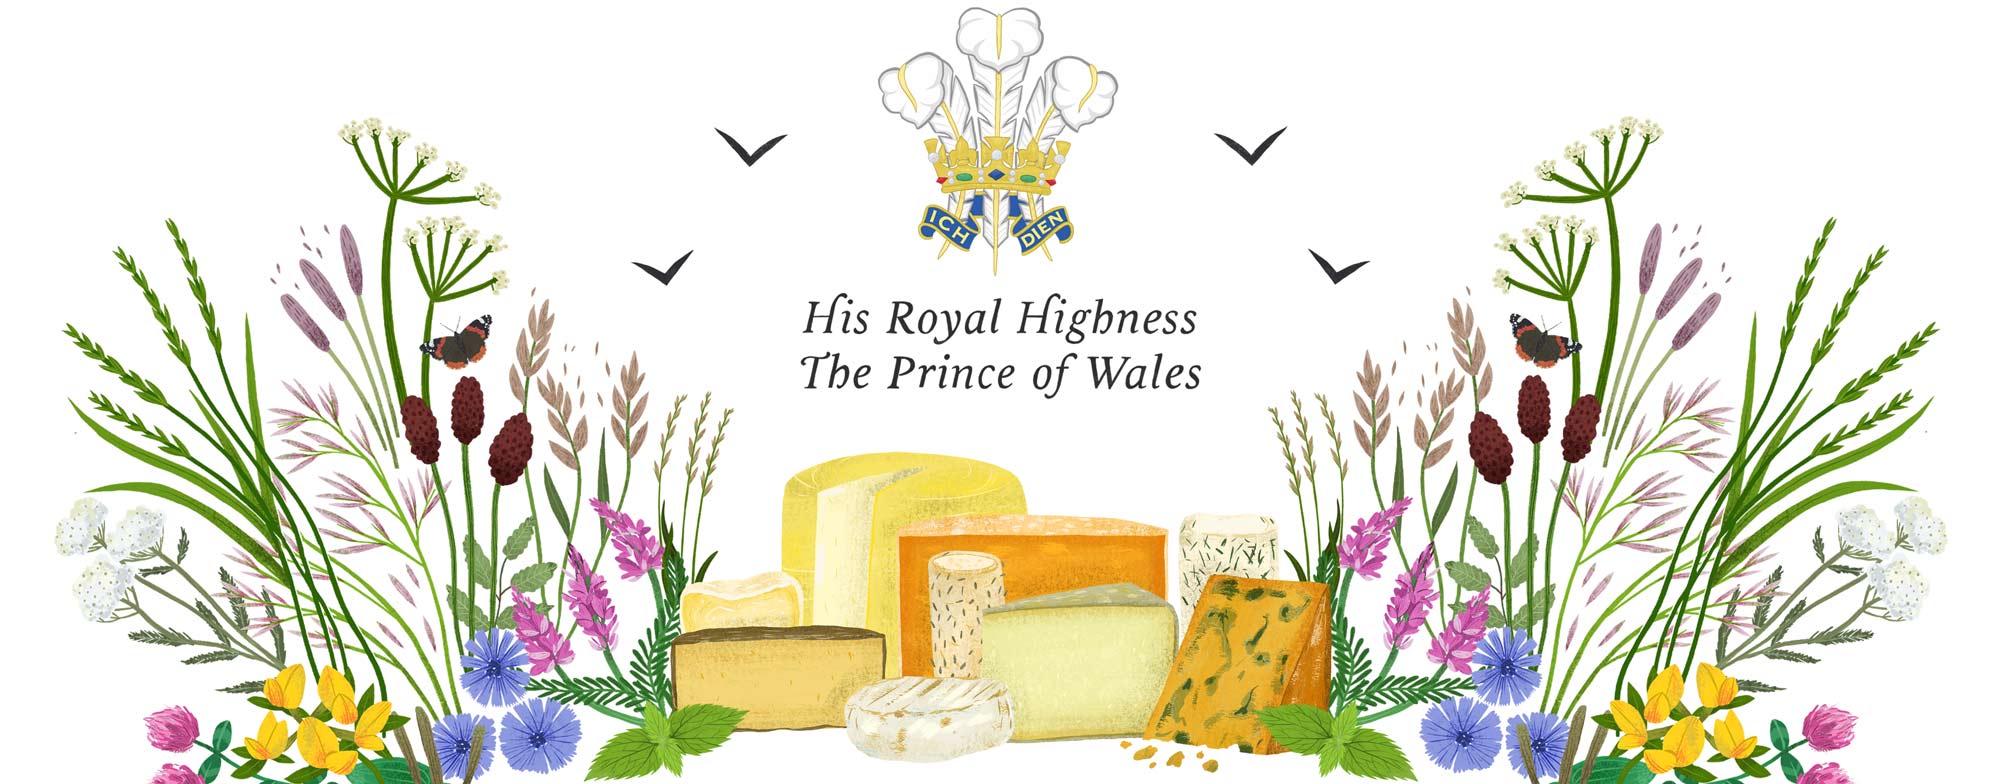 Section of an illustrated cheese plate for Best Artisan Cheese